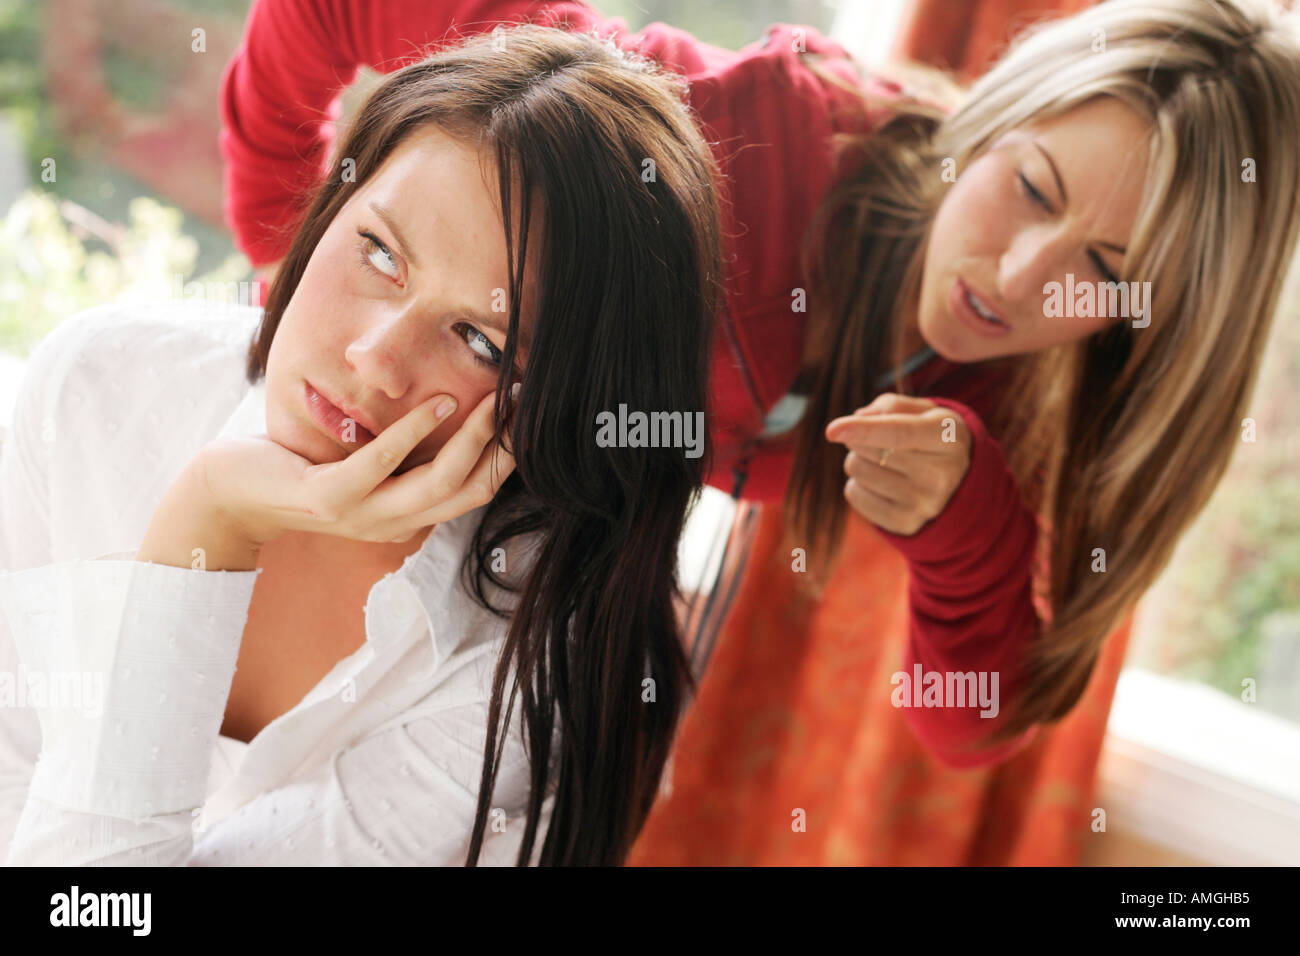 two girls arguing Stock Photo